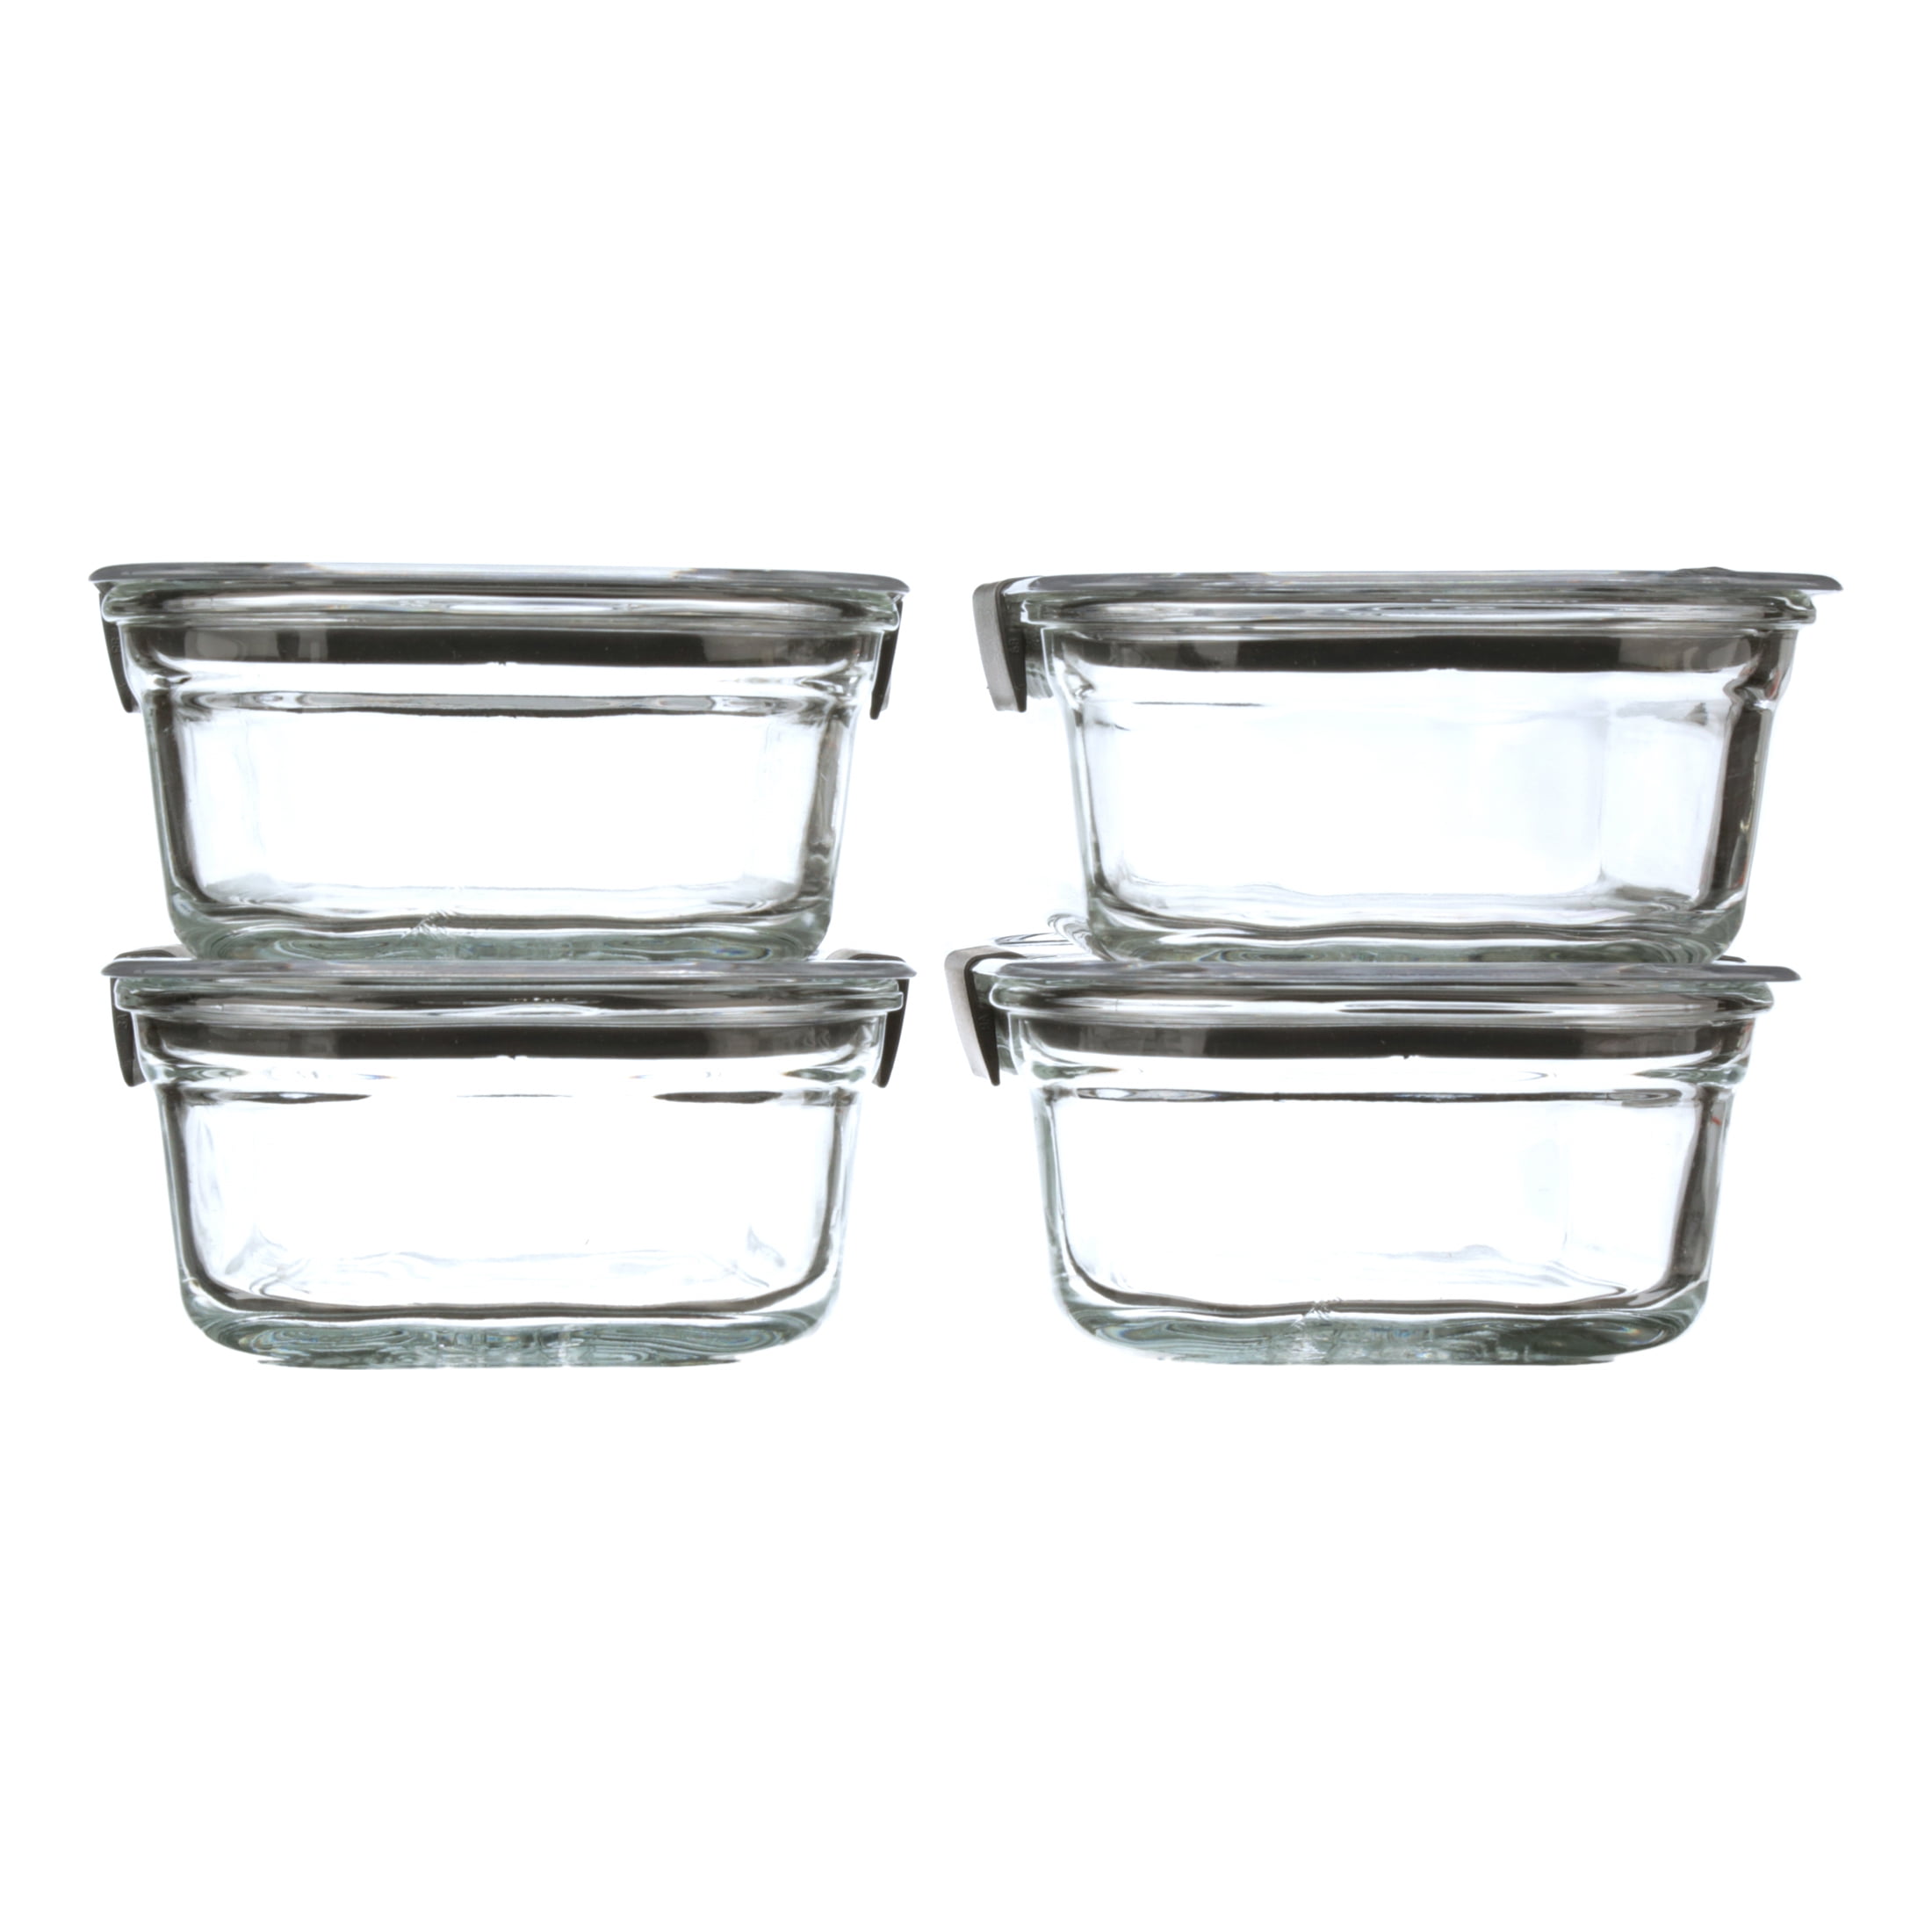 Rubbermaid® Brilliance Glass Food Storage Containers, 2 pk - City Market